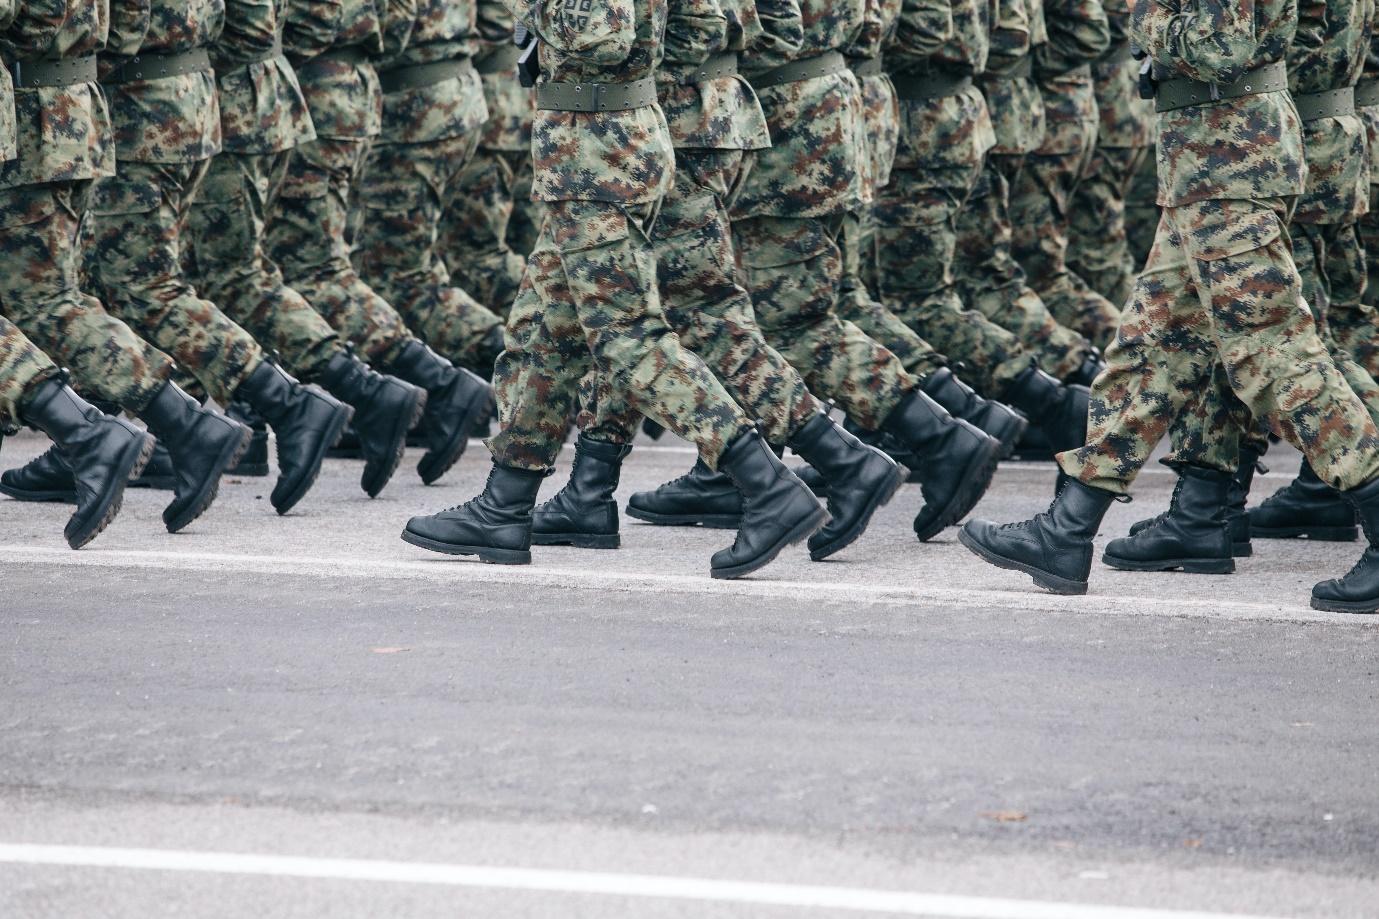 A group of soldiers marching in a line

Description automatically generated